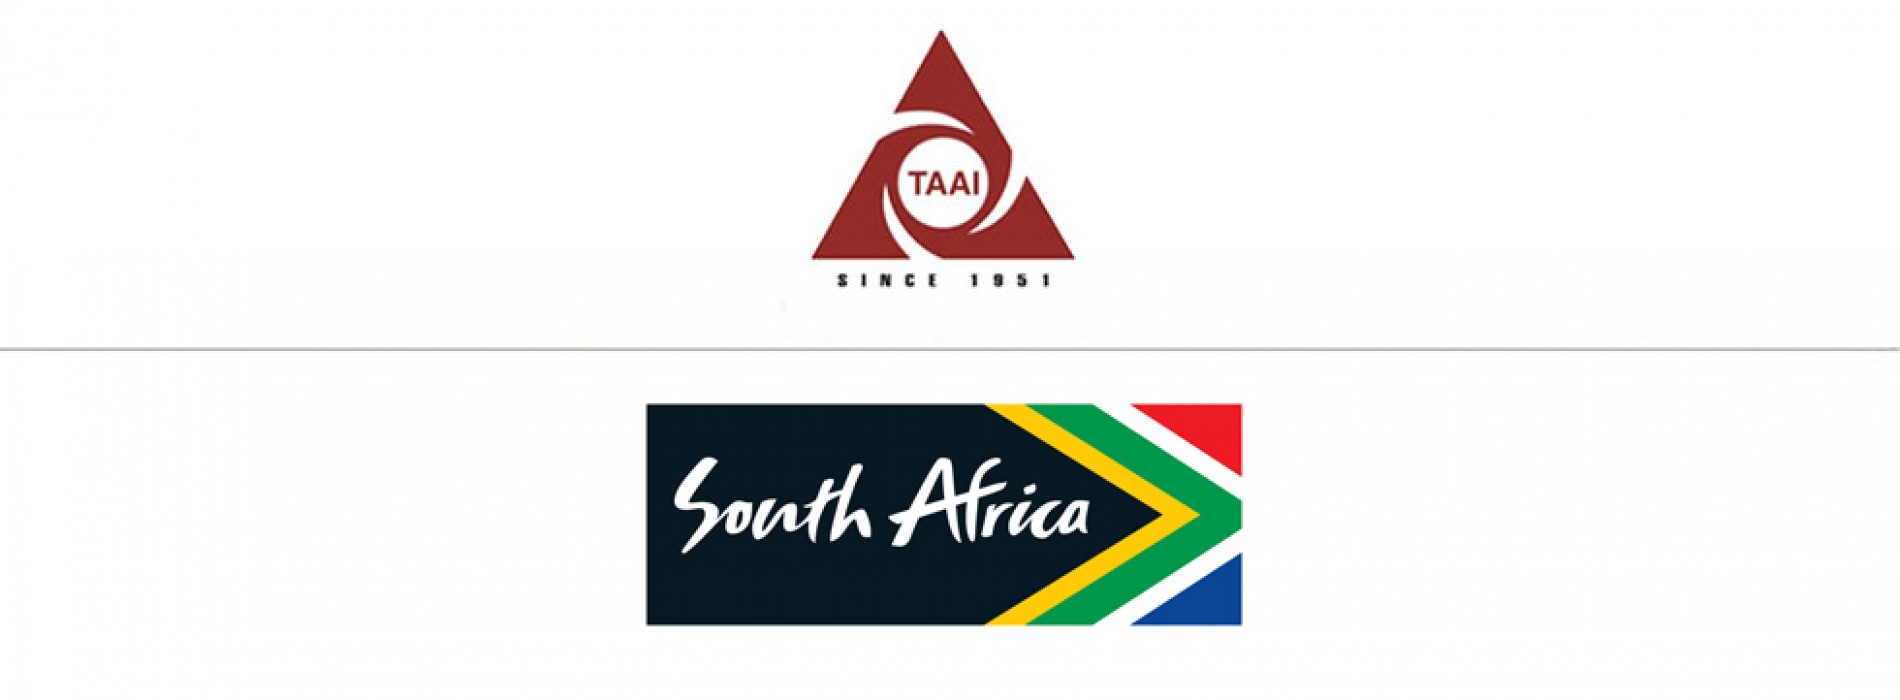 TAAI signs Agreement with South Africa Tourism to educate agents across India